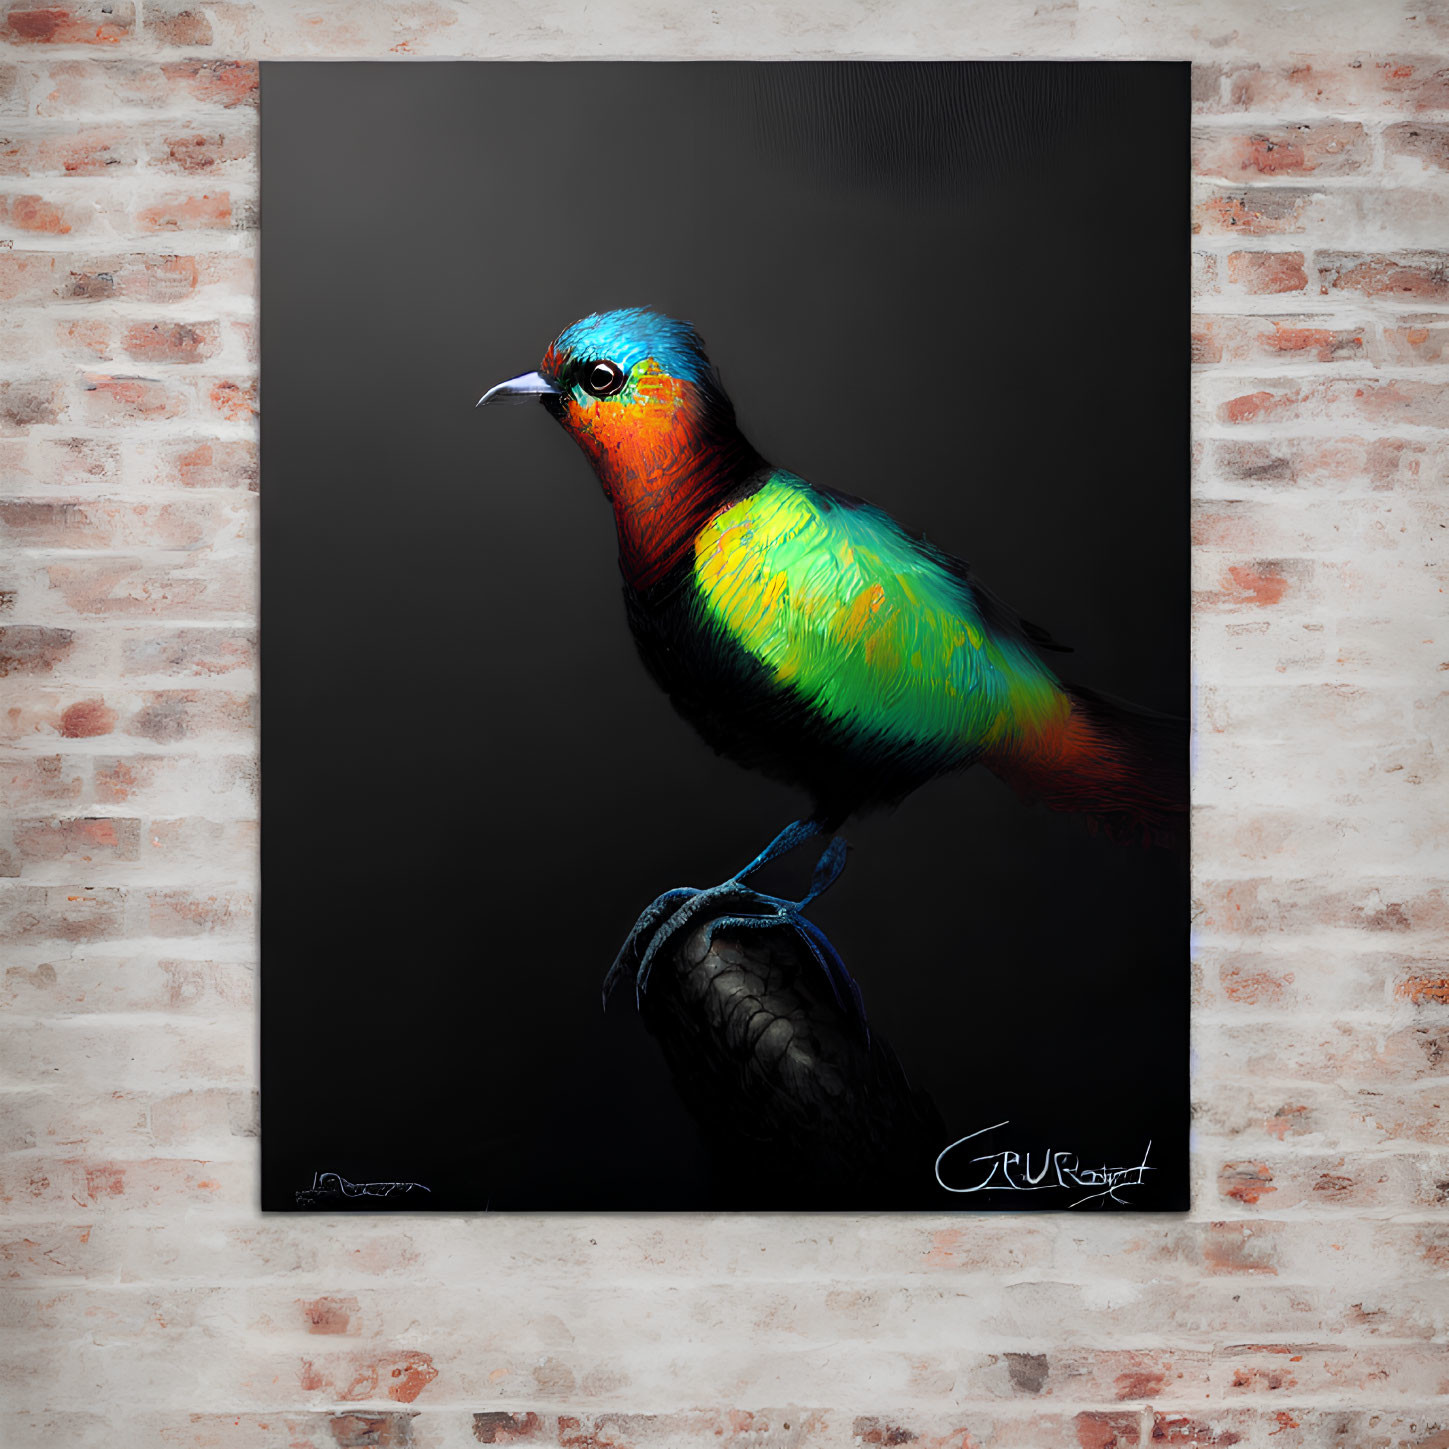 Colorful Bird Painting on Brick Wall with Signature